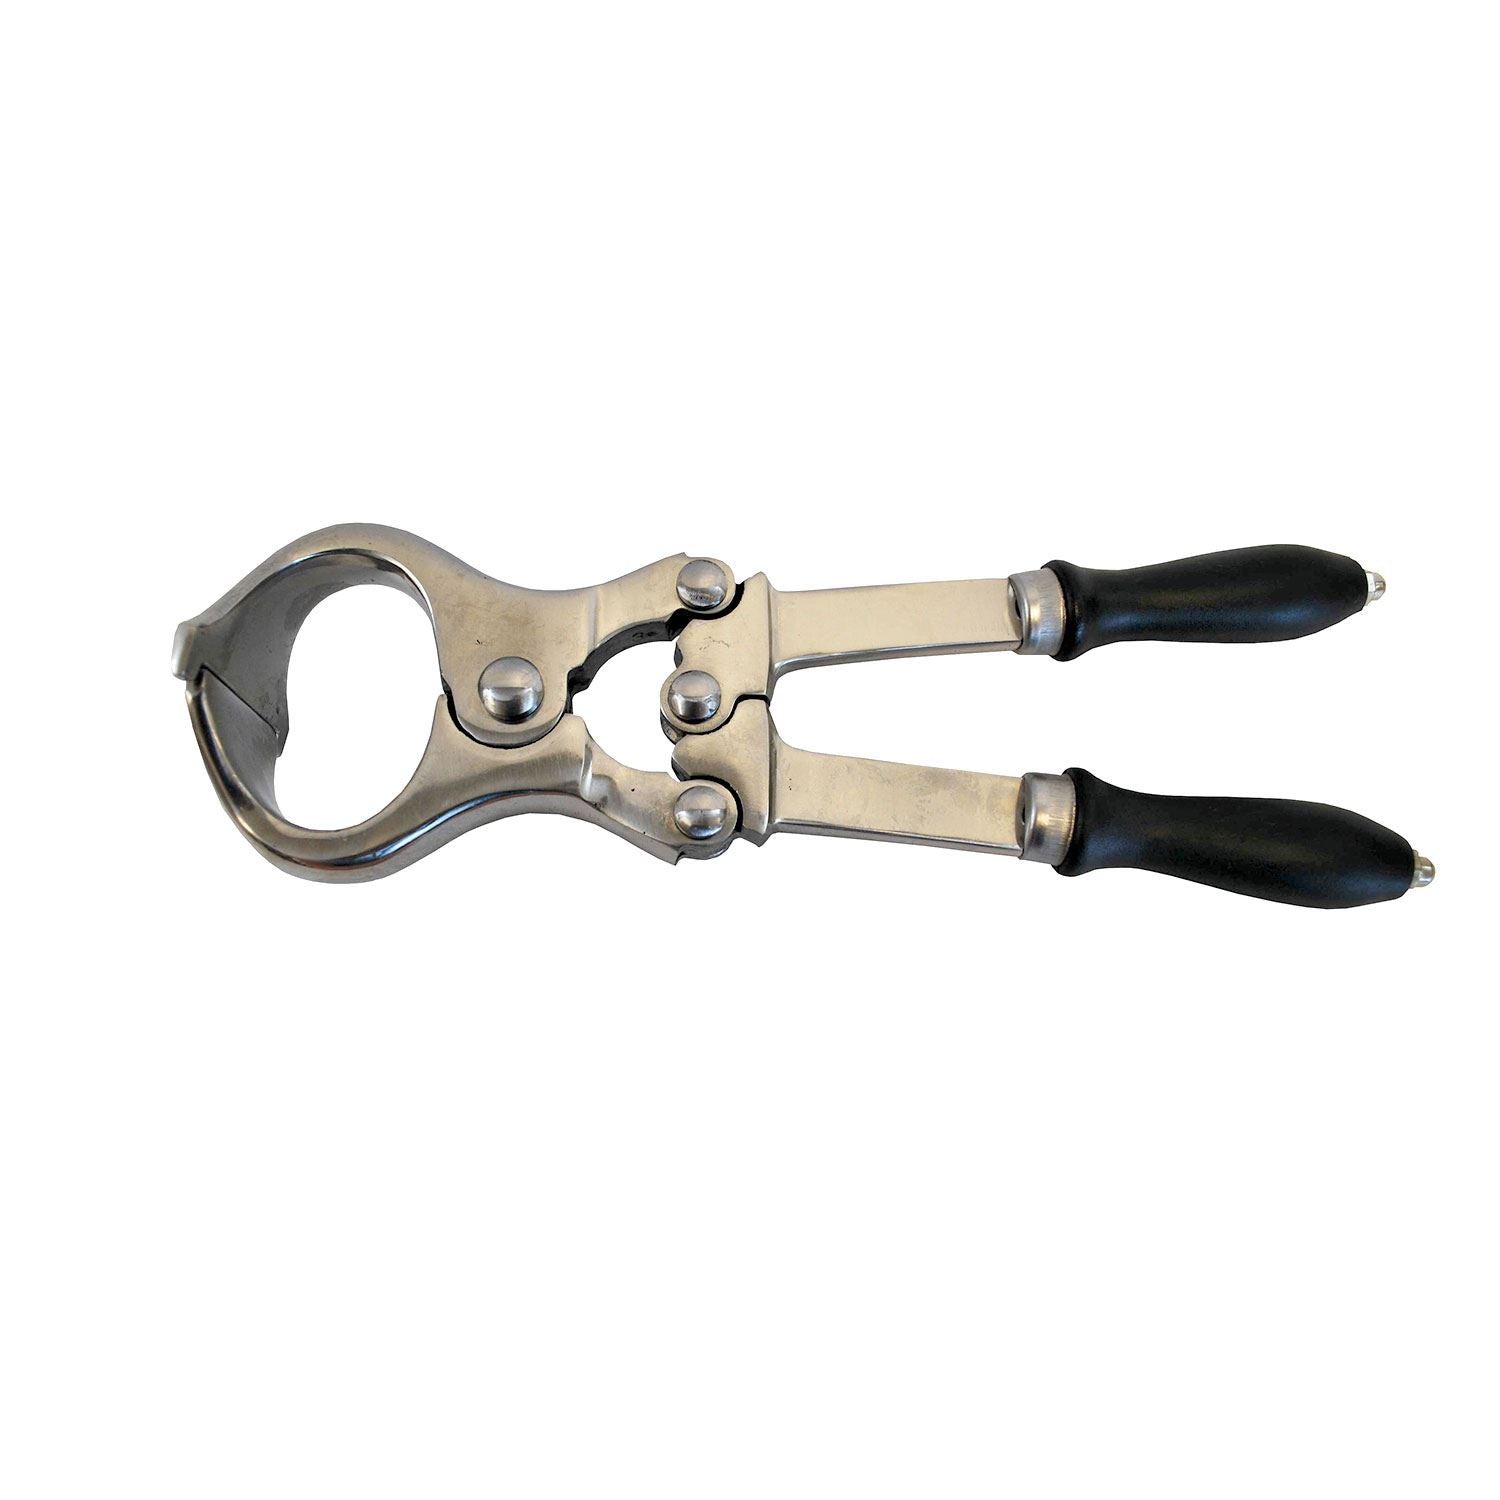 Nettex Castration Pliers - Just Horse Riders